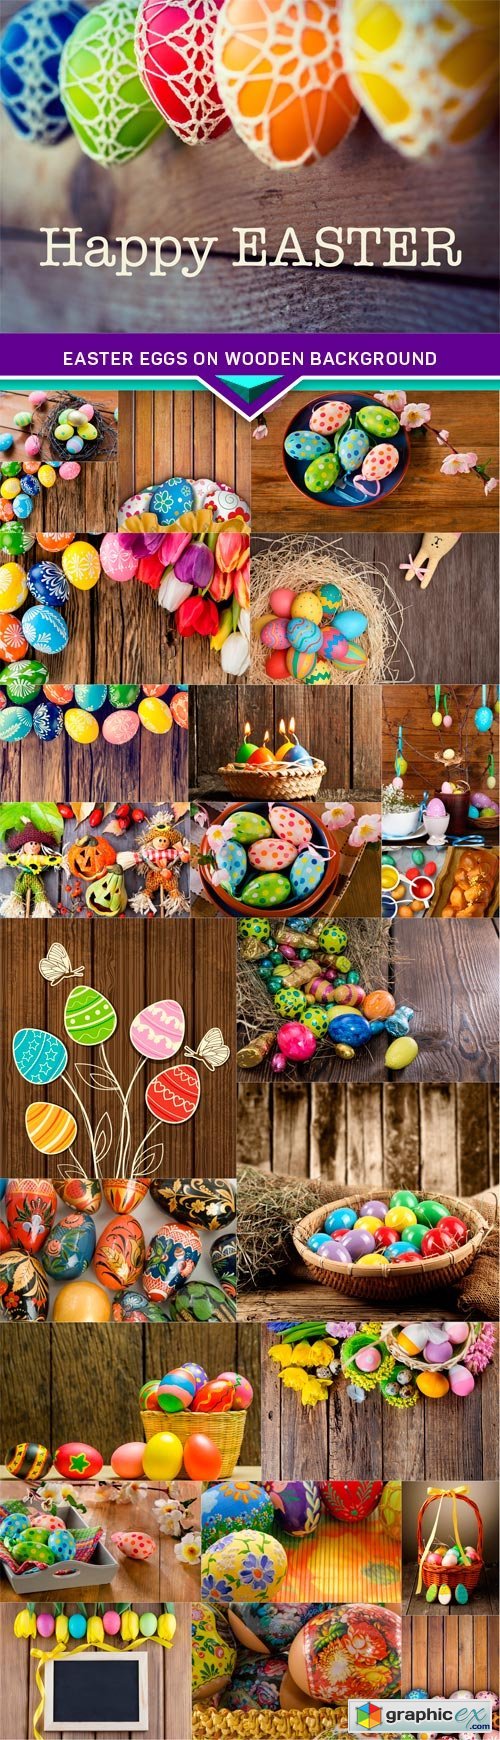 Easter eggs on wooden background 25x JPEG